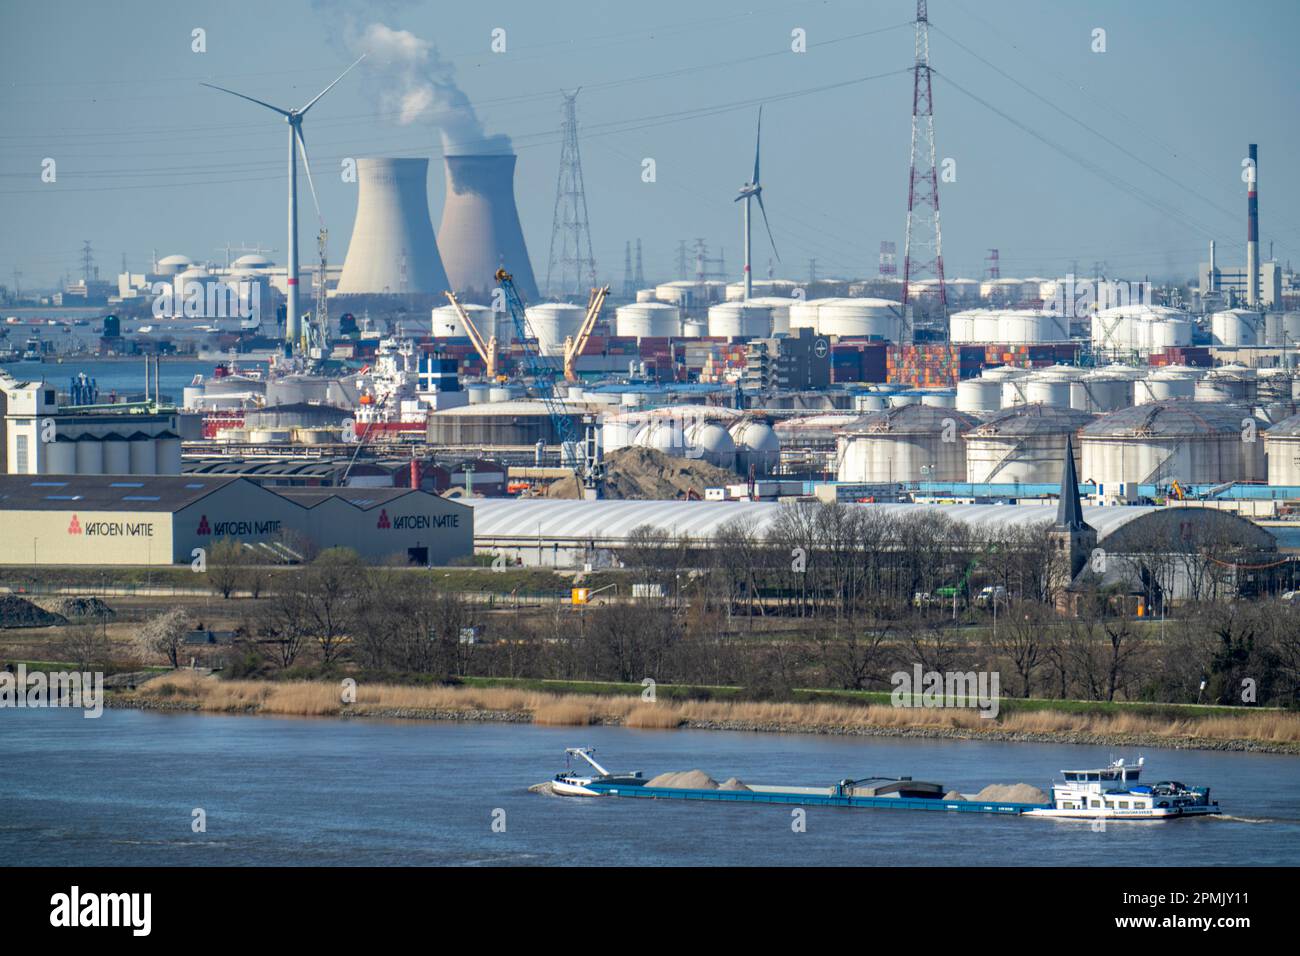 The port of Antwerp, on the Scheldt, is considered the second largest seaport in Europe, behind the Doel nuclear power plant, Flanders, Belgium Stock Photo